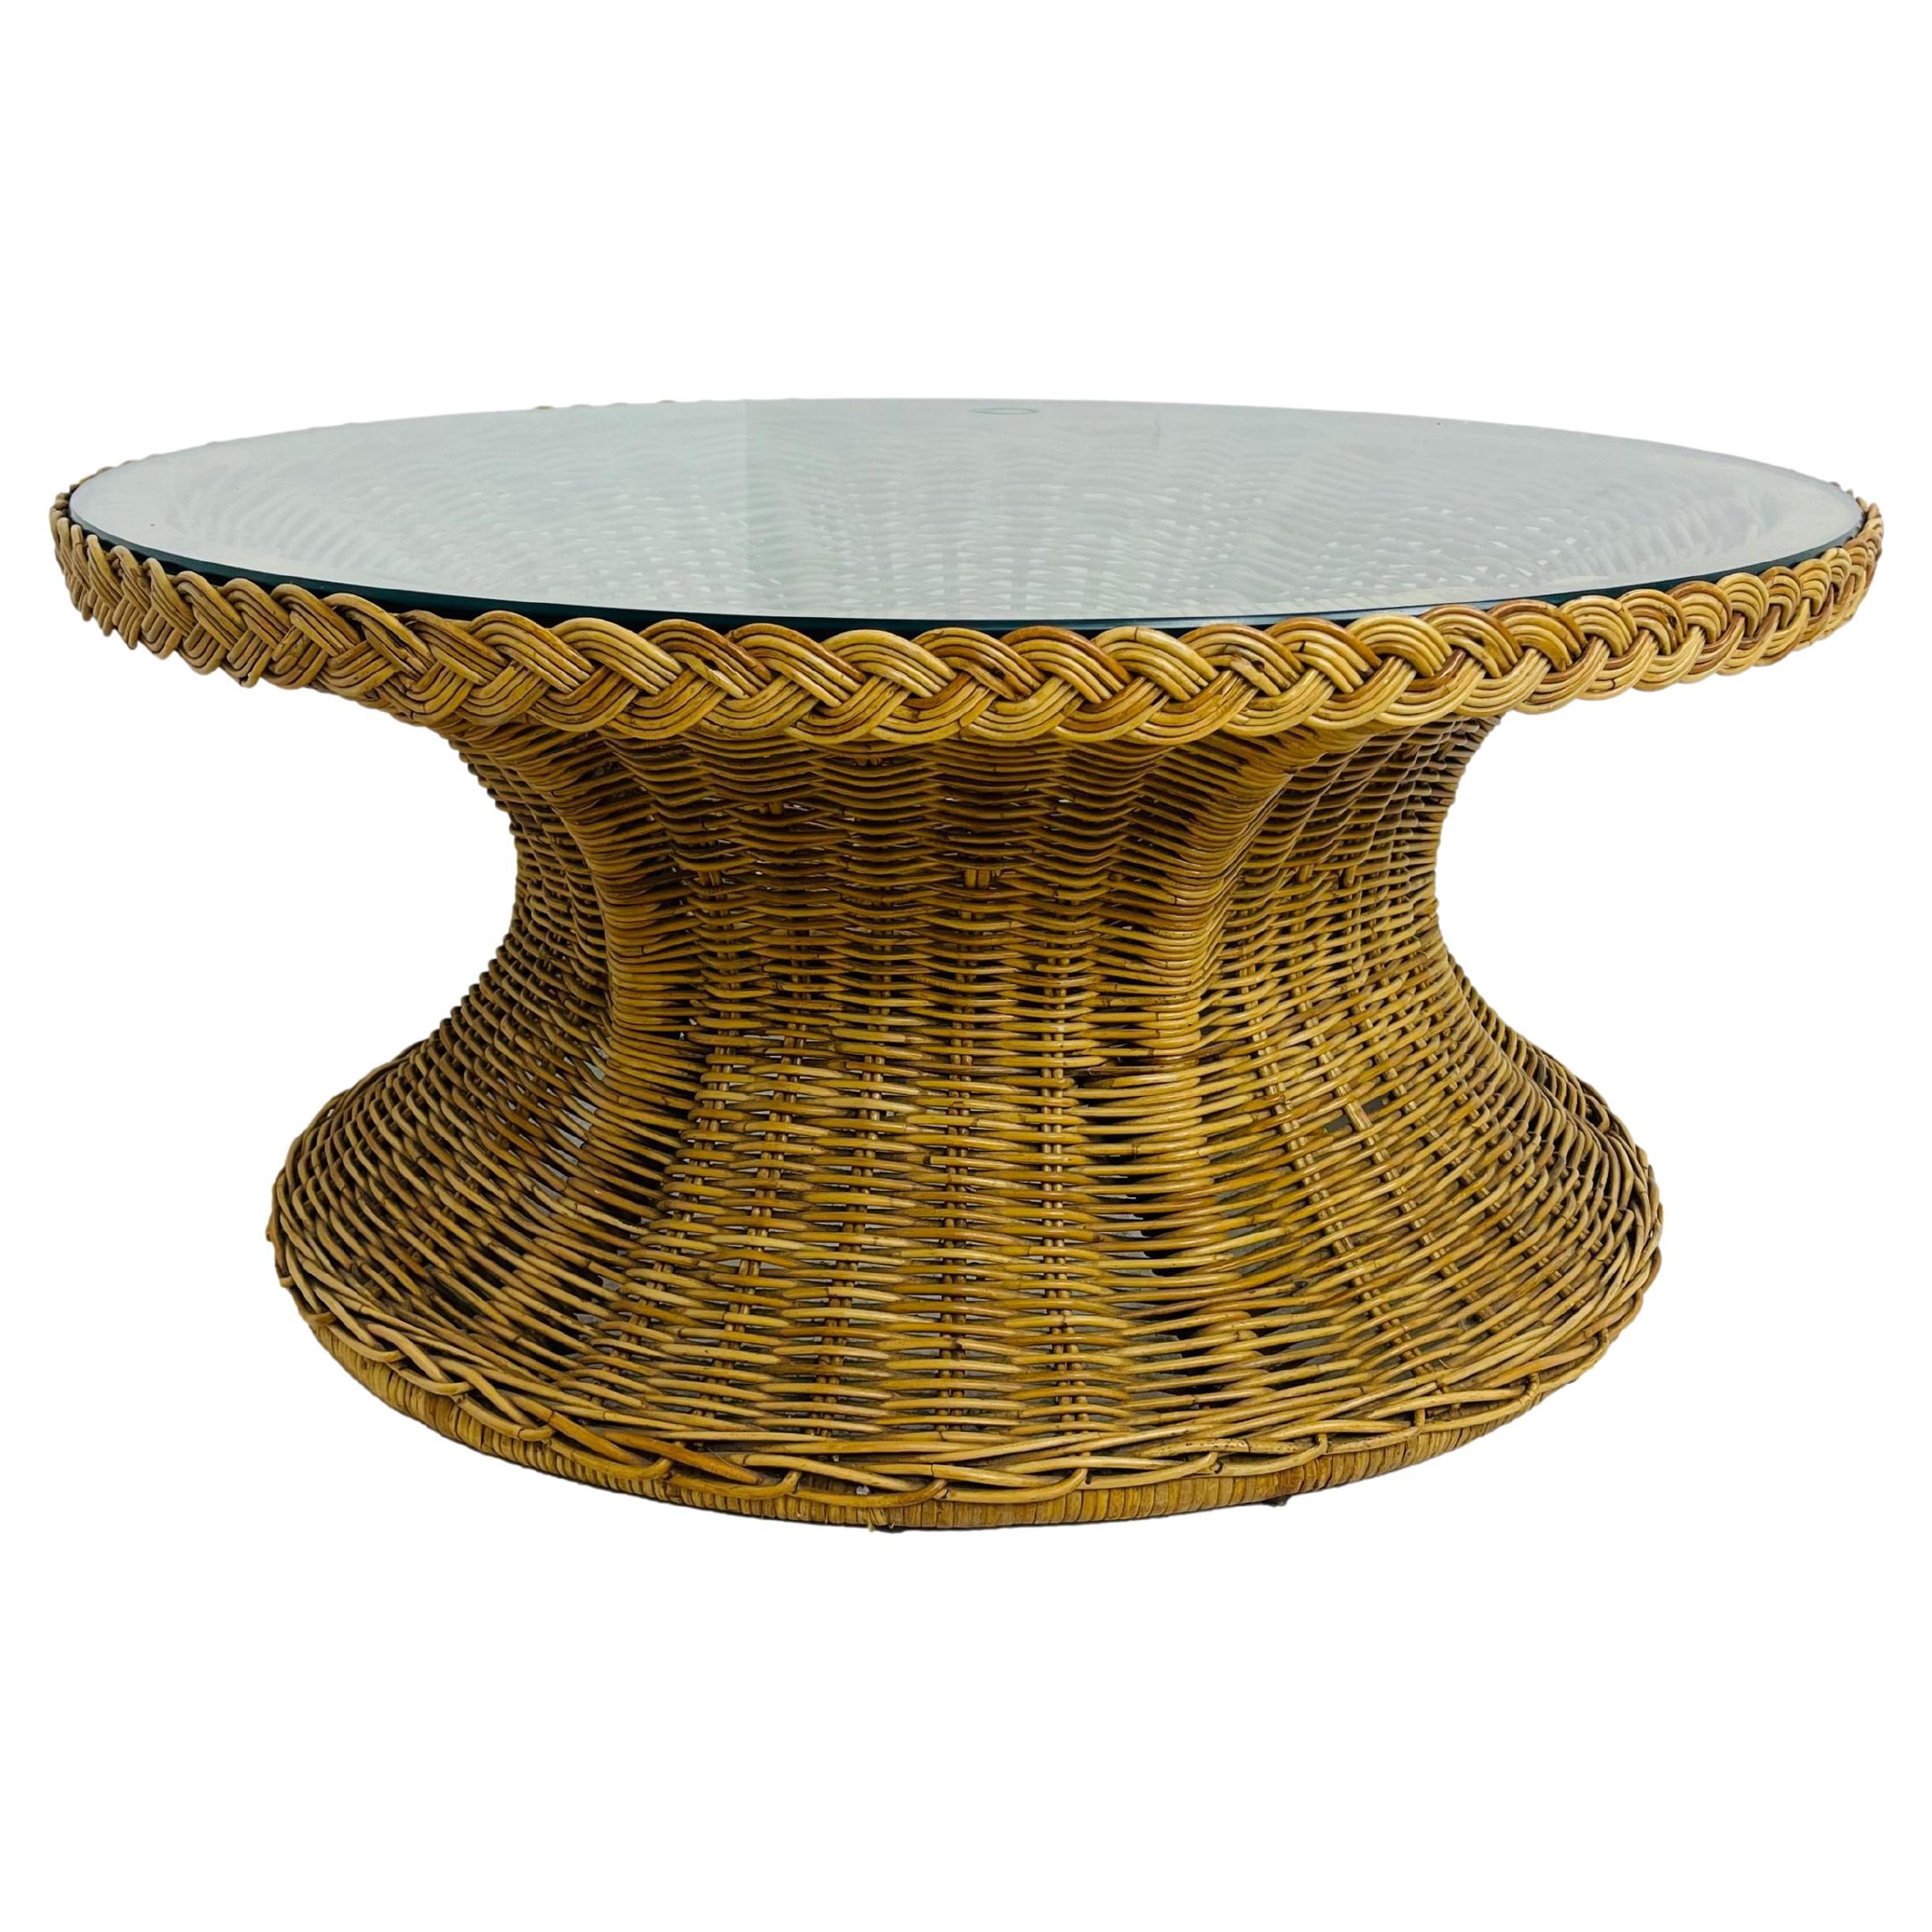 Braided Rattan Coffee Table by Wicker Works